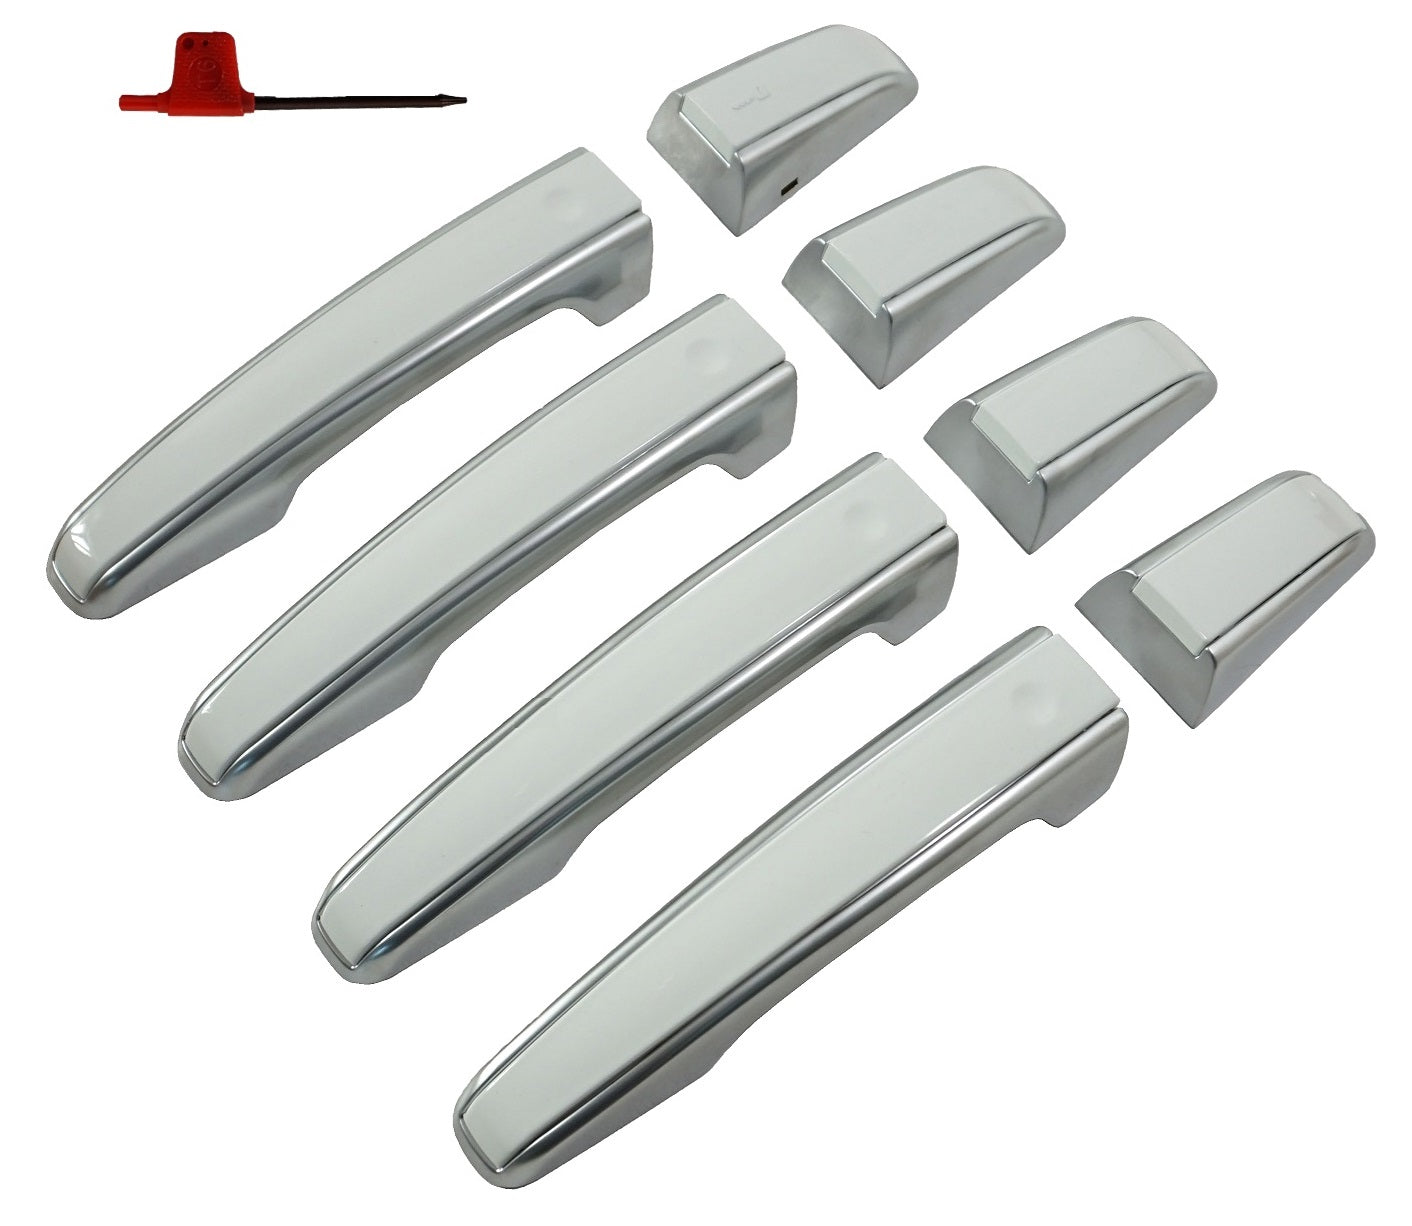 'Autobiography Style' Door Handles Skins in Silver & White for Range Rover L405